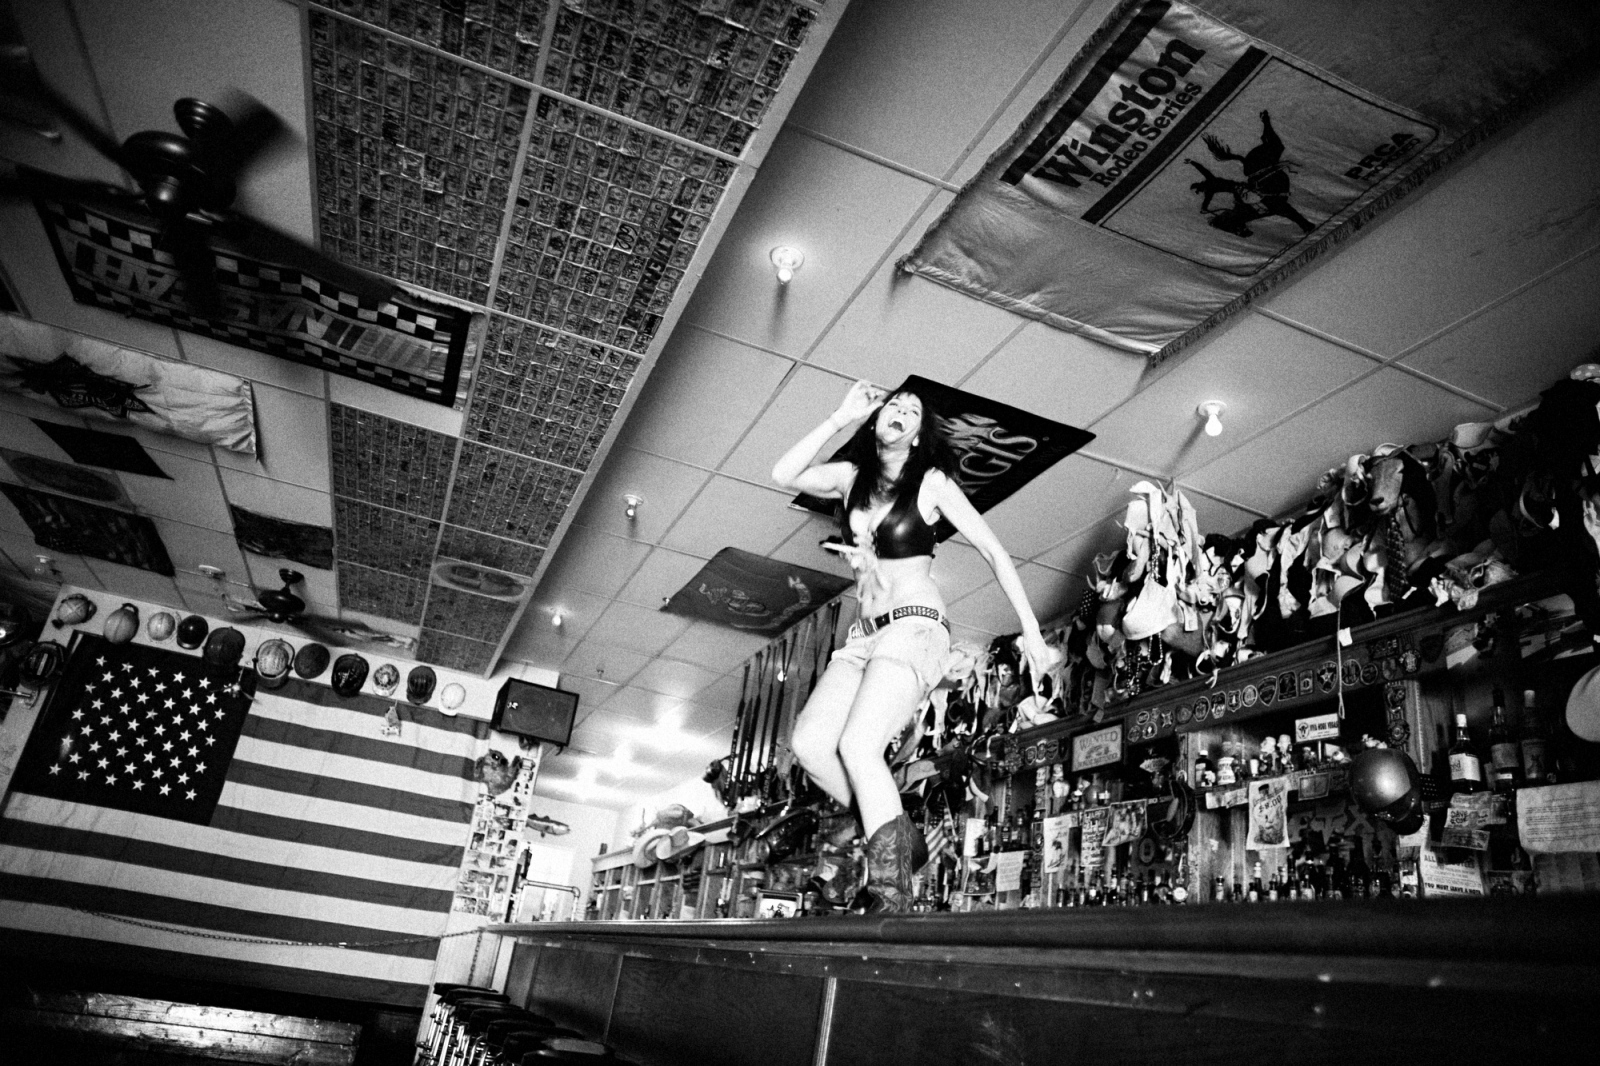 Death of The Colorado - Jasmin, a bartender at the Hogs and Heifers bar in...